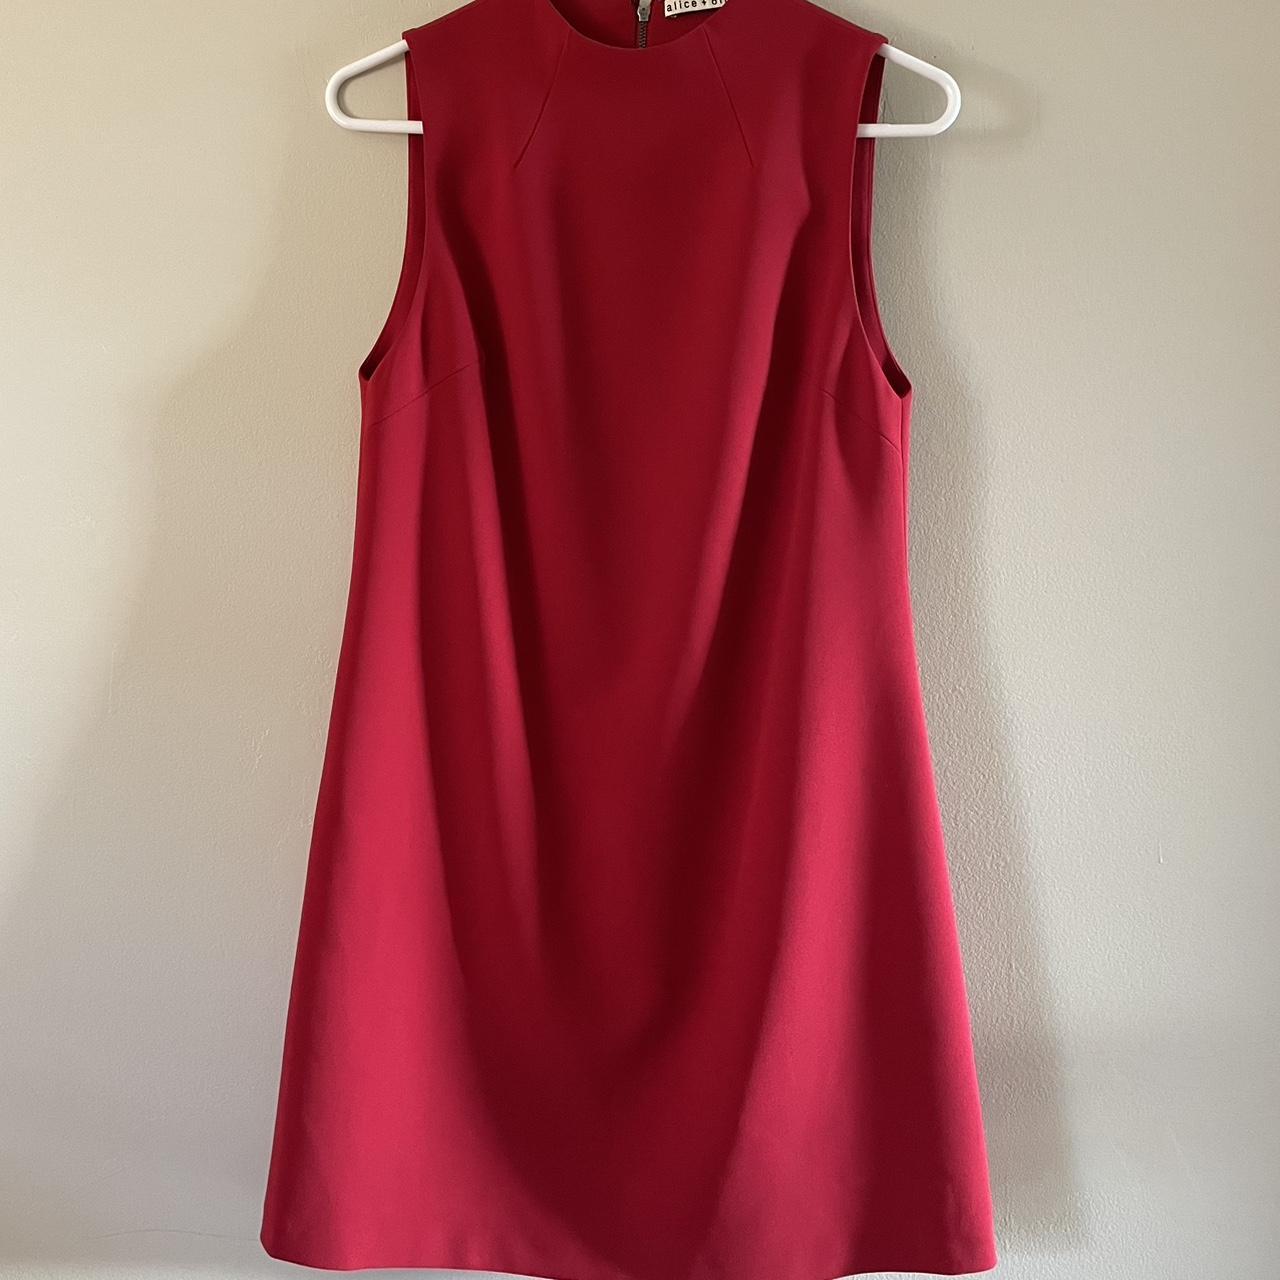 alice + olivia Women's Red and Burgundy Dress (4)